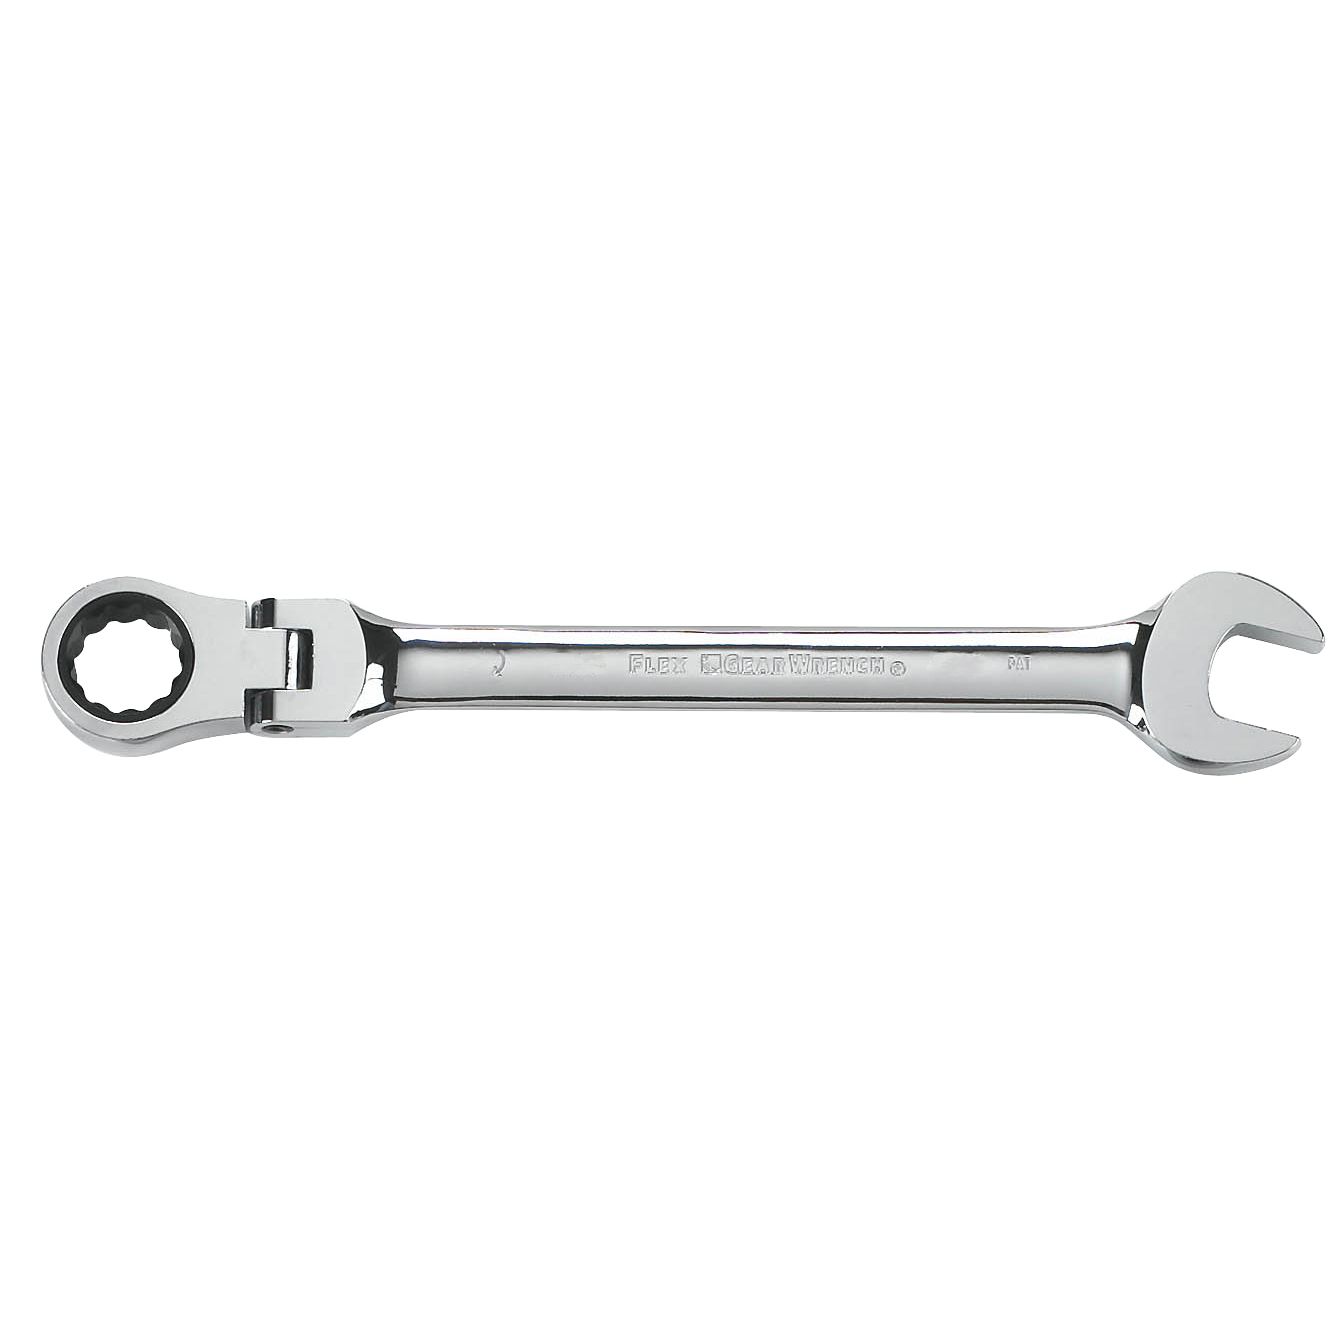 GearWrench 17mm Full Polish Flex Ratcheting Combination Wrench